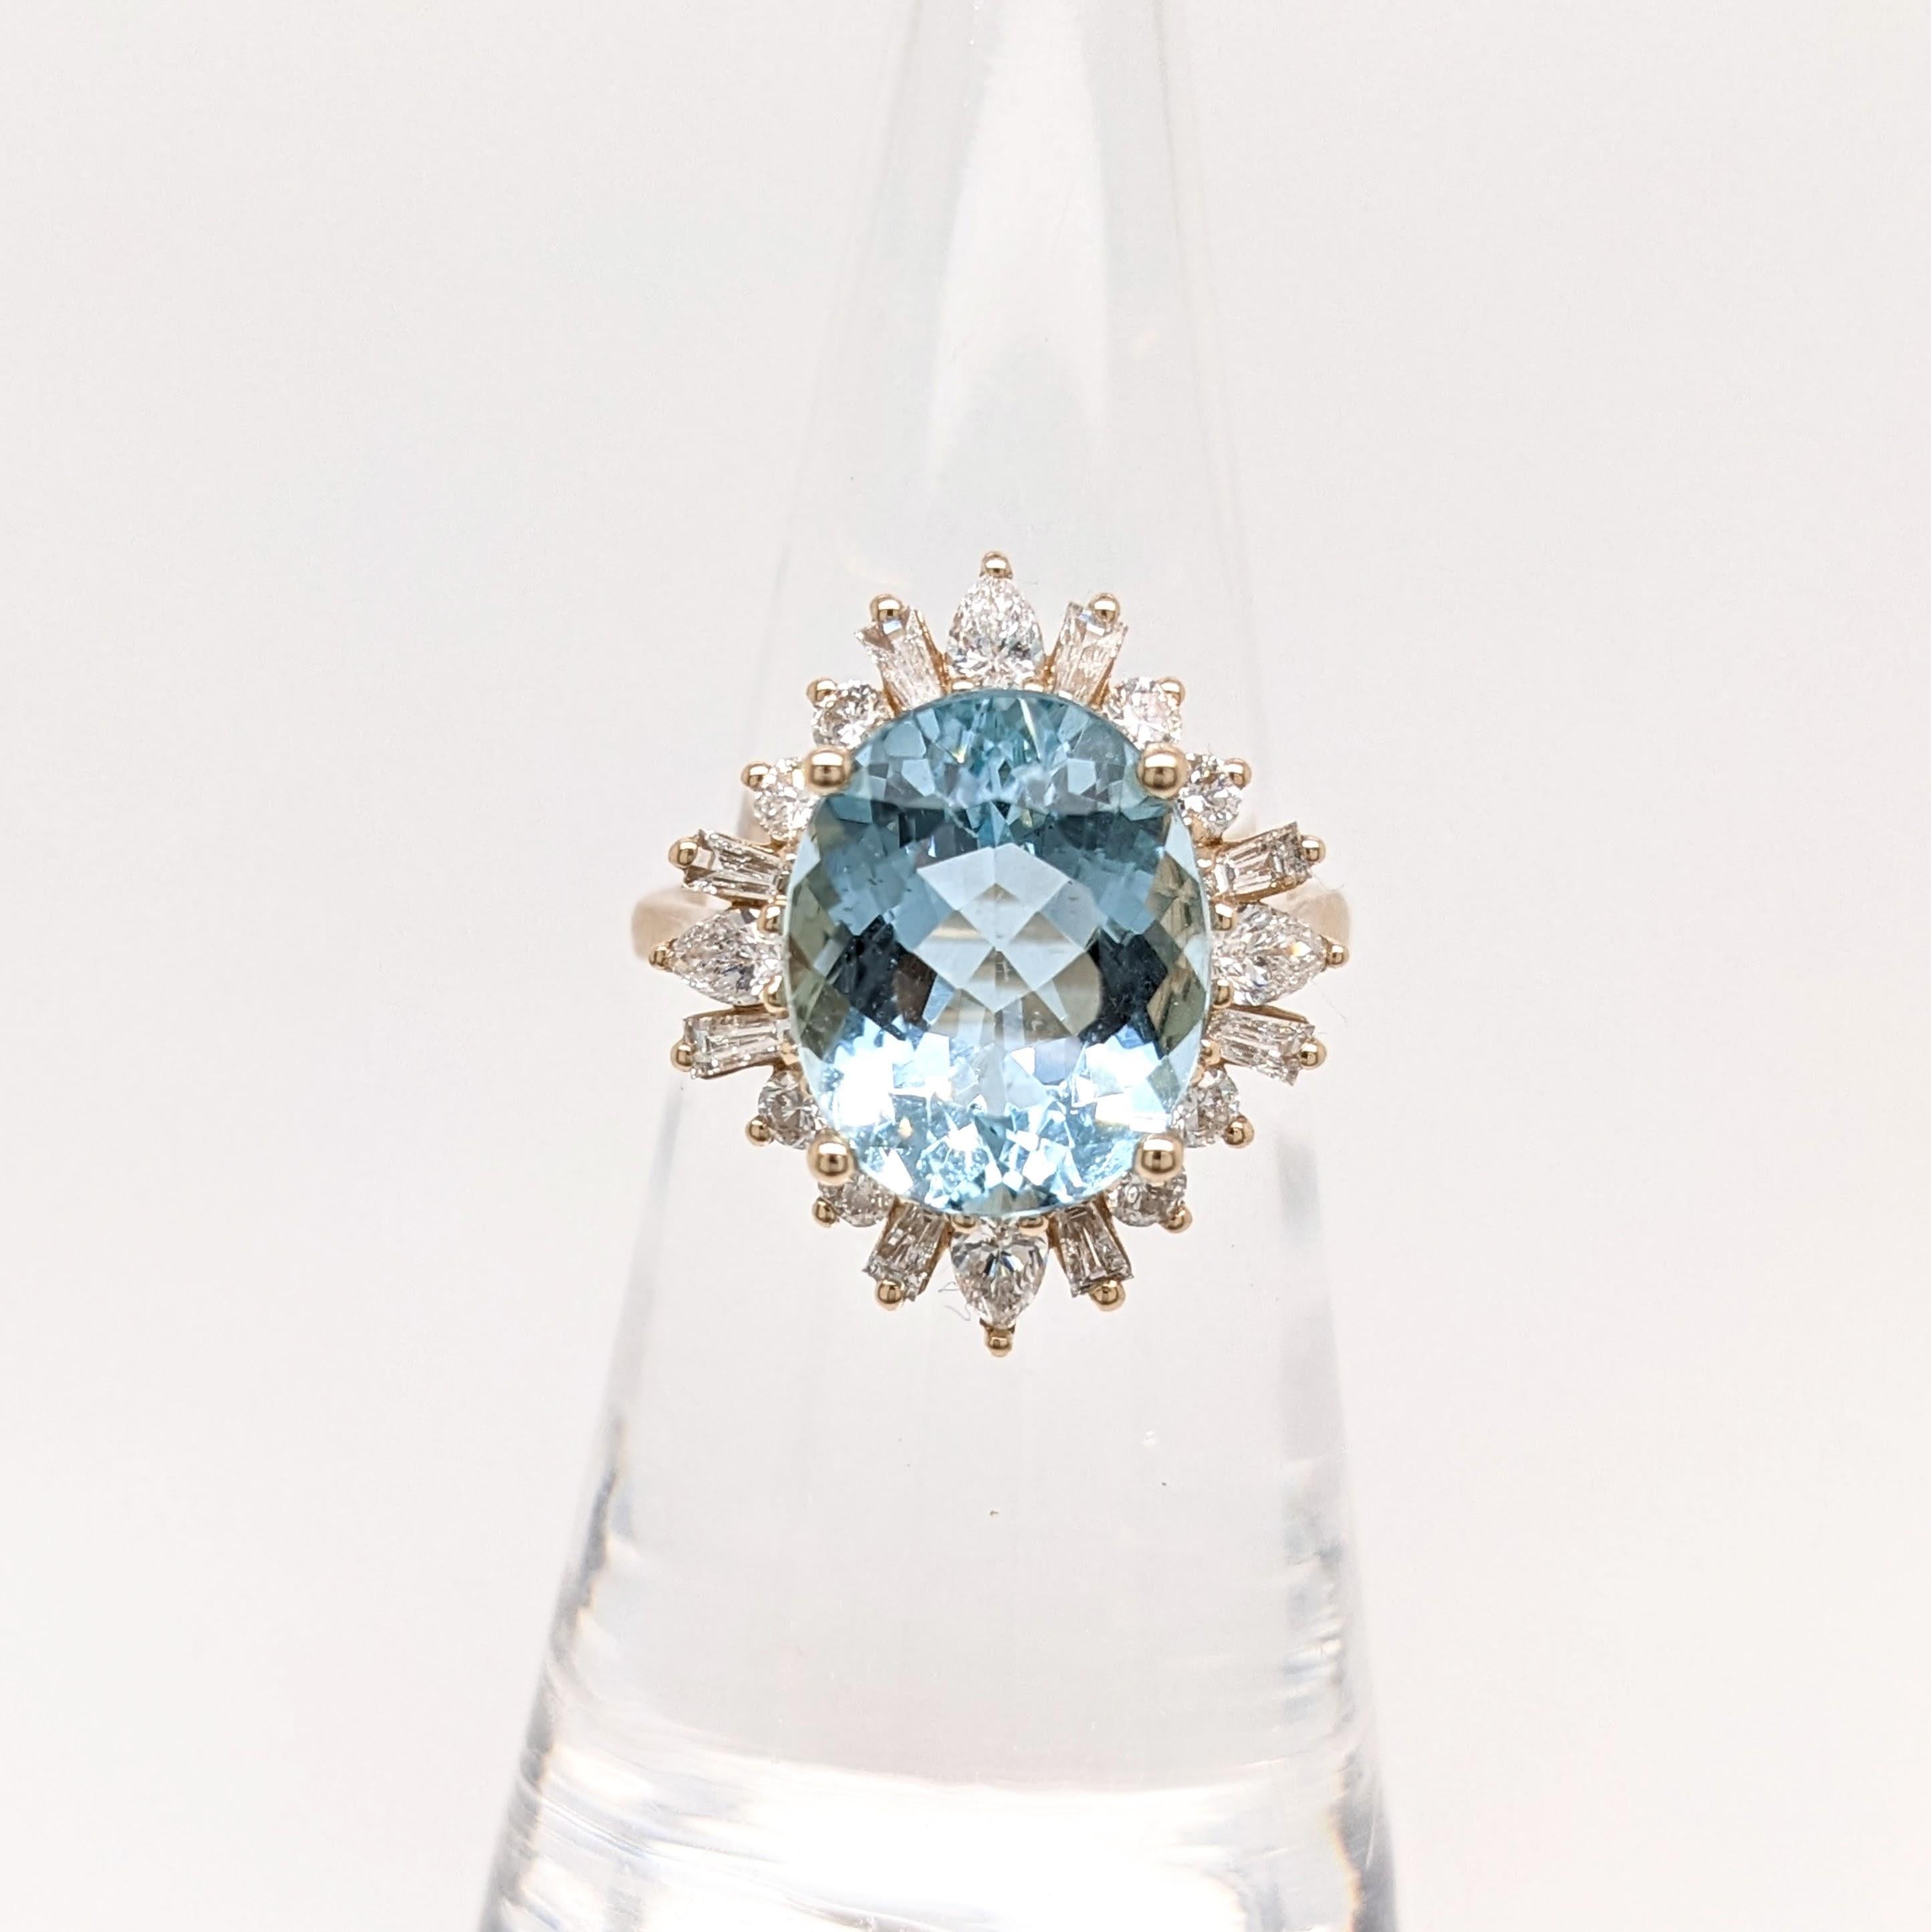 A sparkling blue aquamarine in 14k yellow gold with a fancy all natural earth mined diamond halo. A statement ring design perfect for an eye catching engagement or anniversary.

Specifications

Item Type: Ring
Centre Stone: Aquamarine
Treatment: